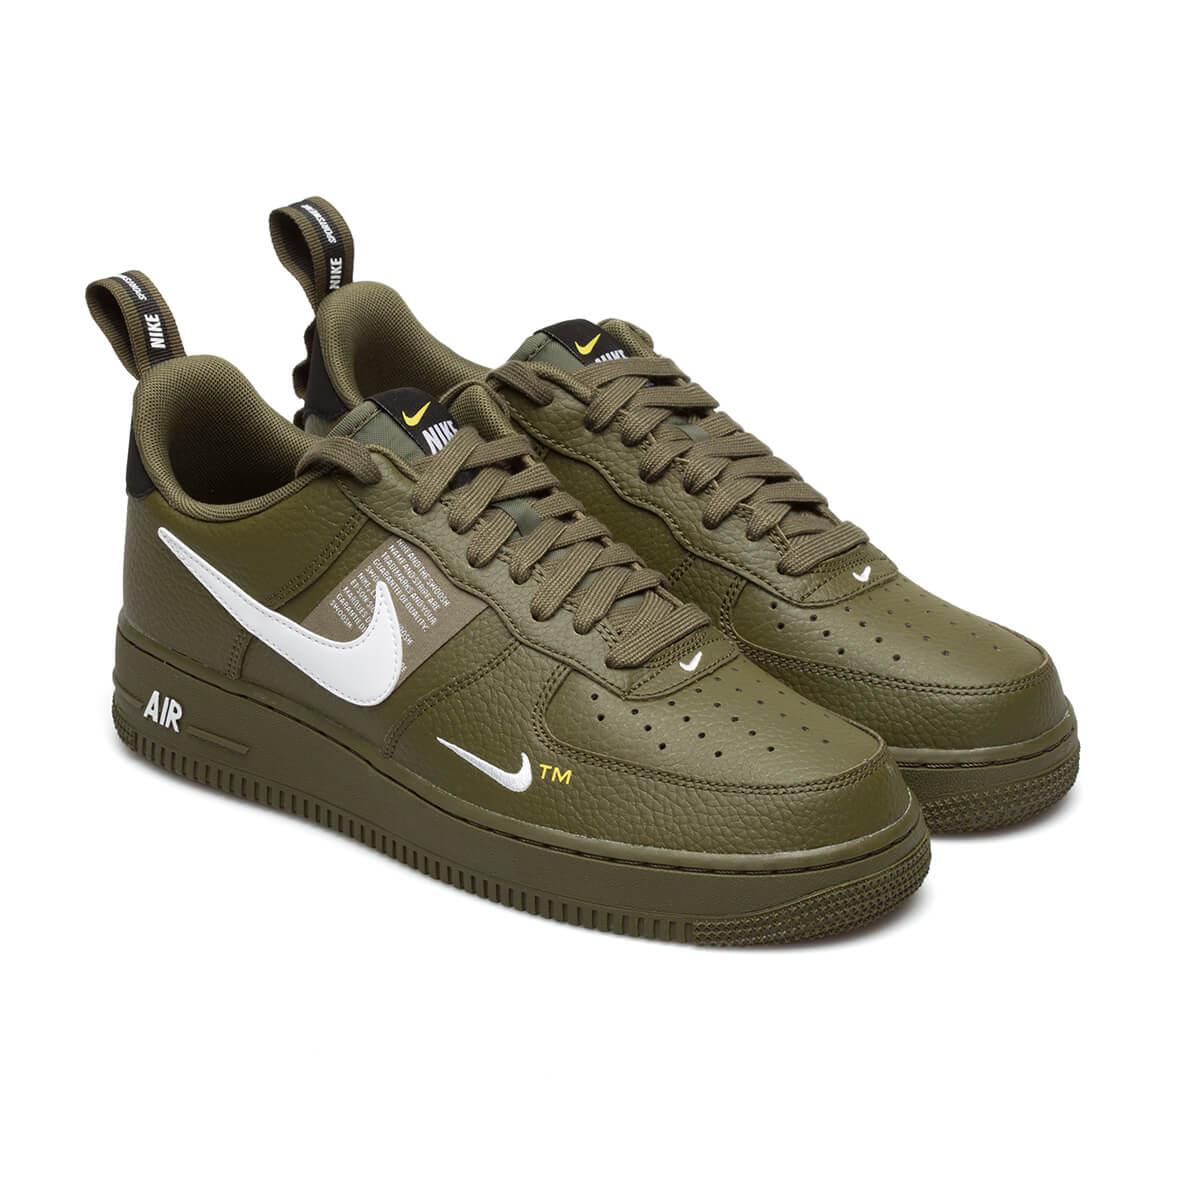 Air Force 1 '07 Lv8 Utility in Olive 